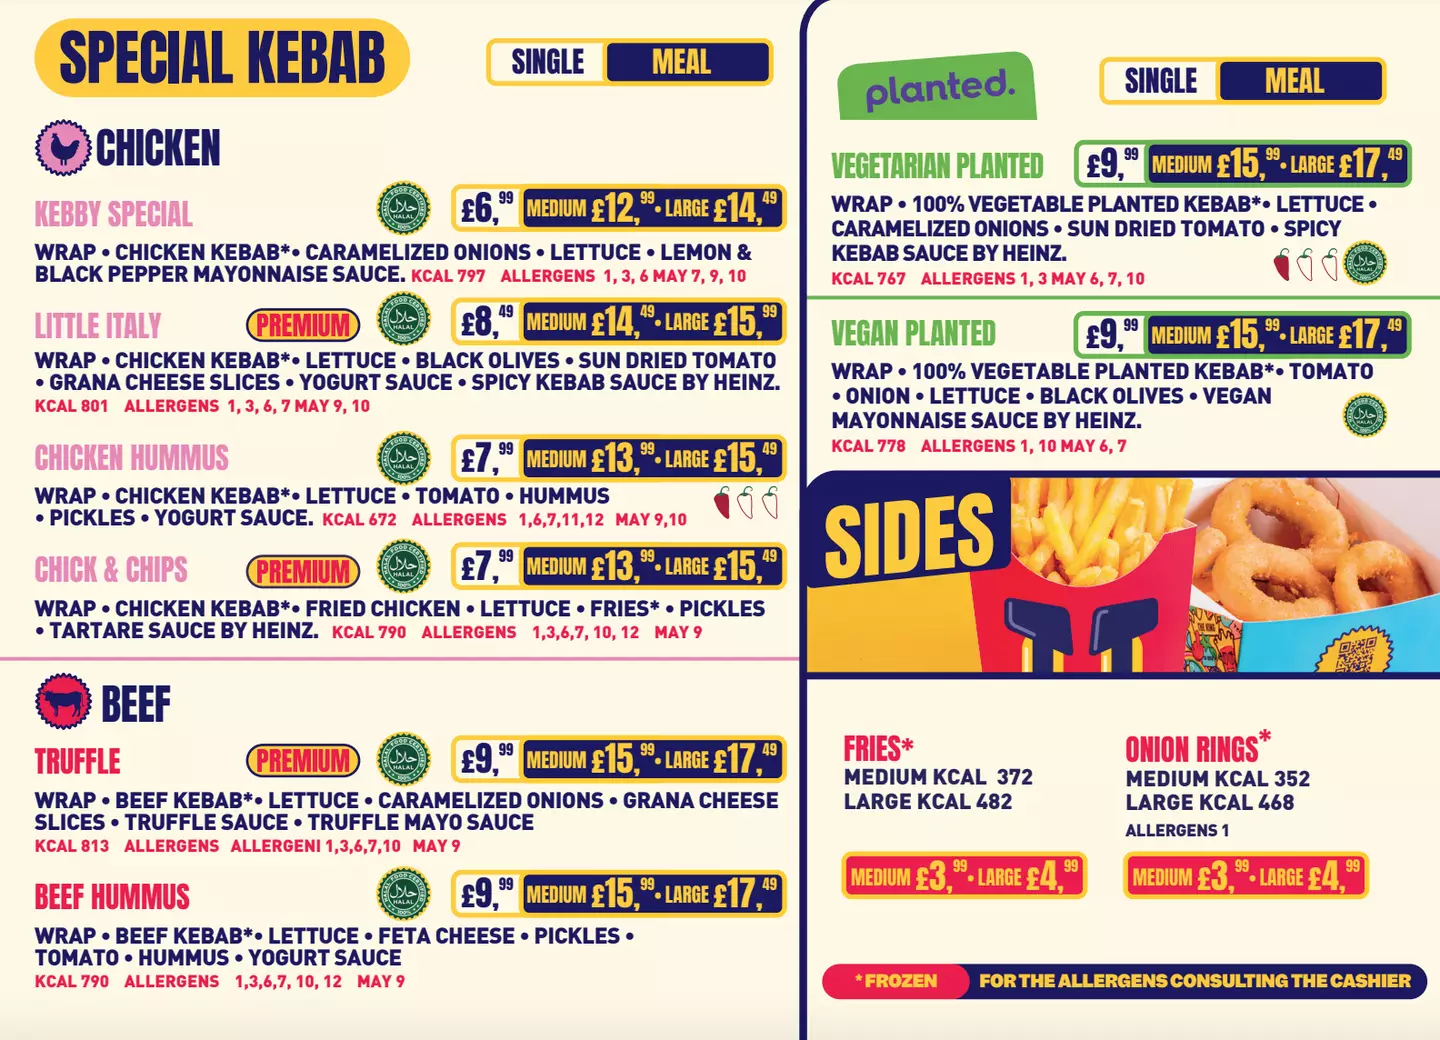 The revamped menu features five new and exciting kebabs.